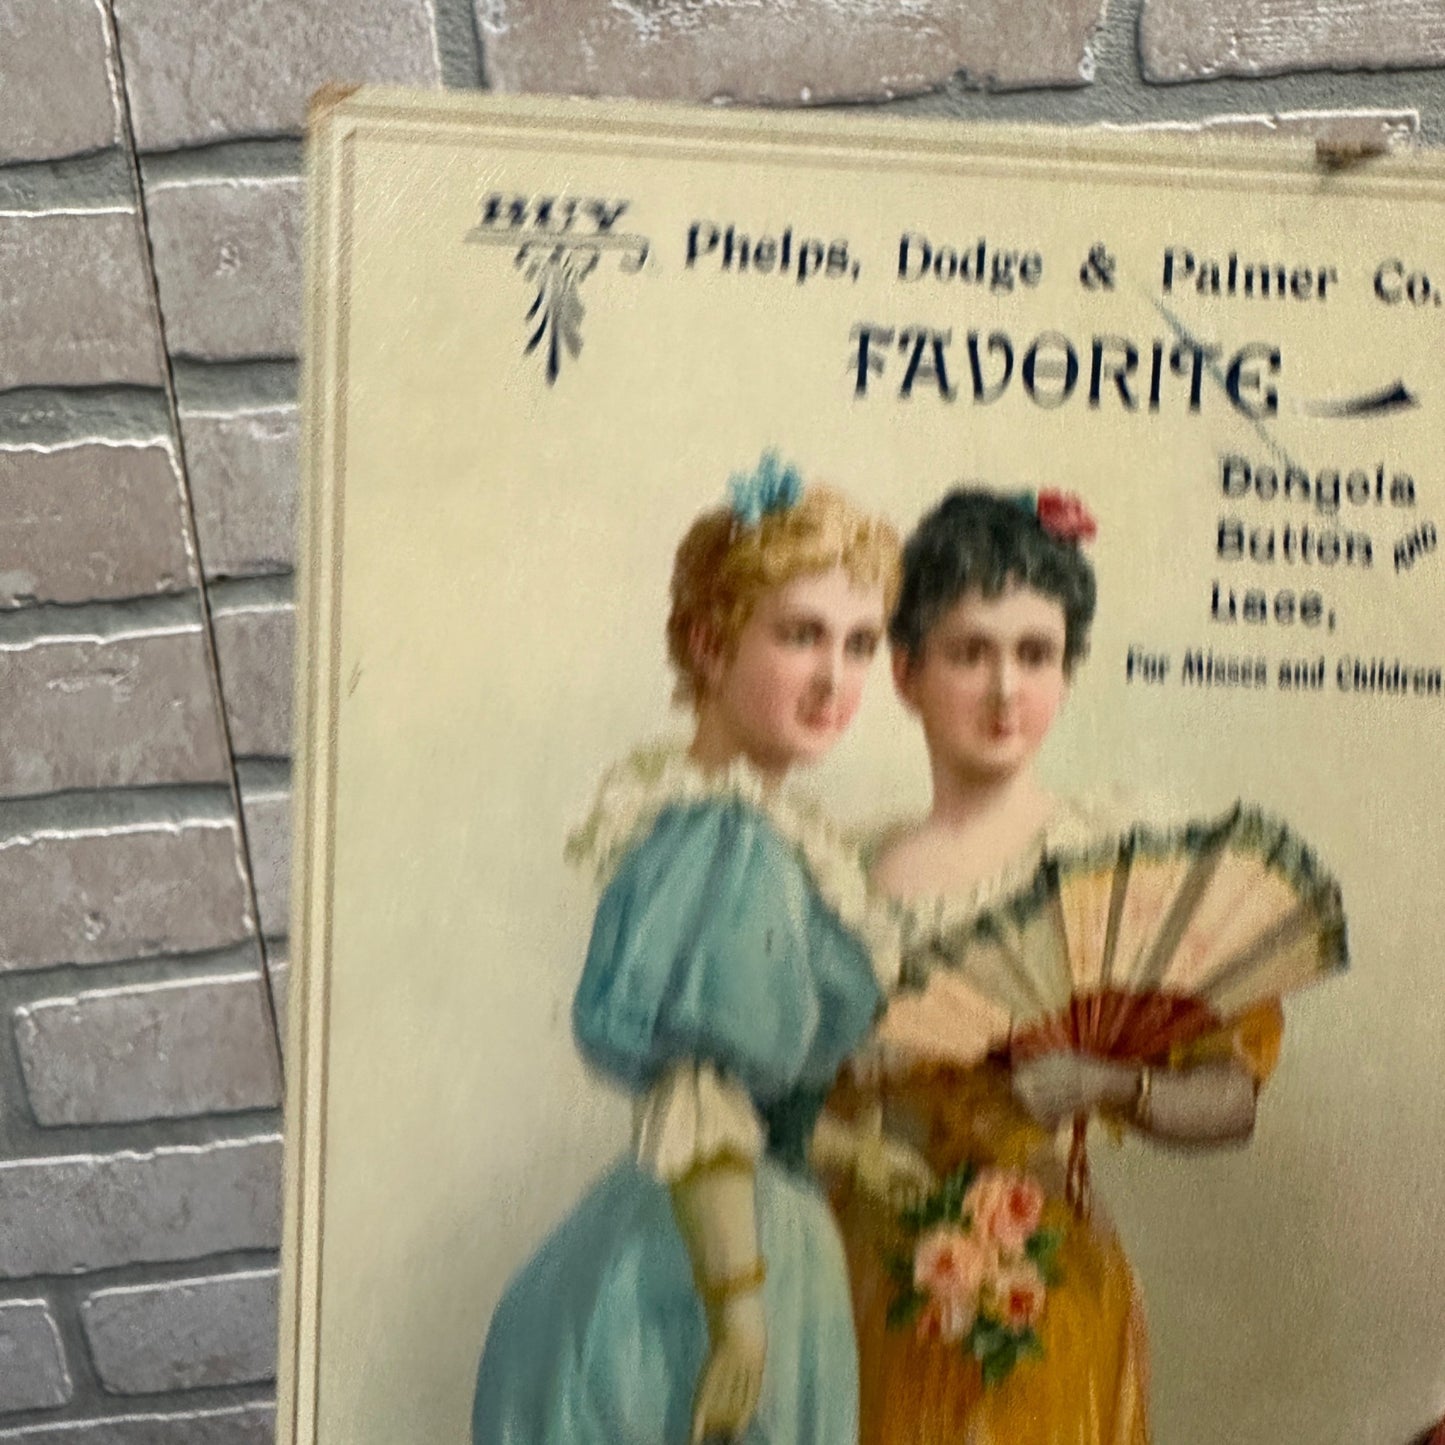 Amtique 1890s Victorian Phelps. Dodge, & Palmer Womens Fashion Advertising Sign